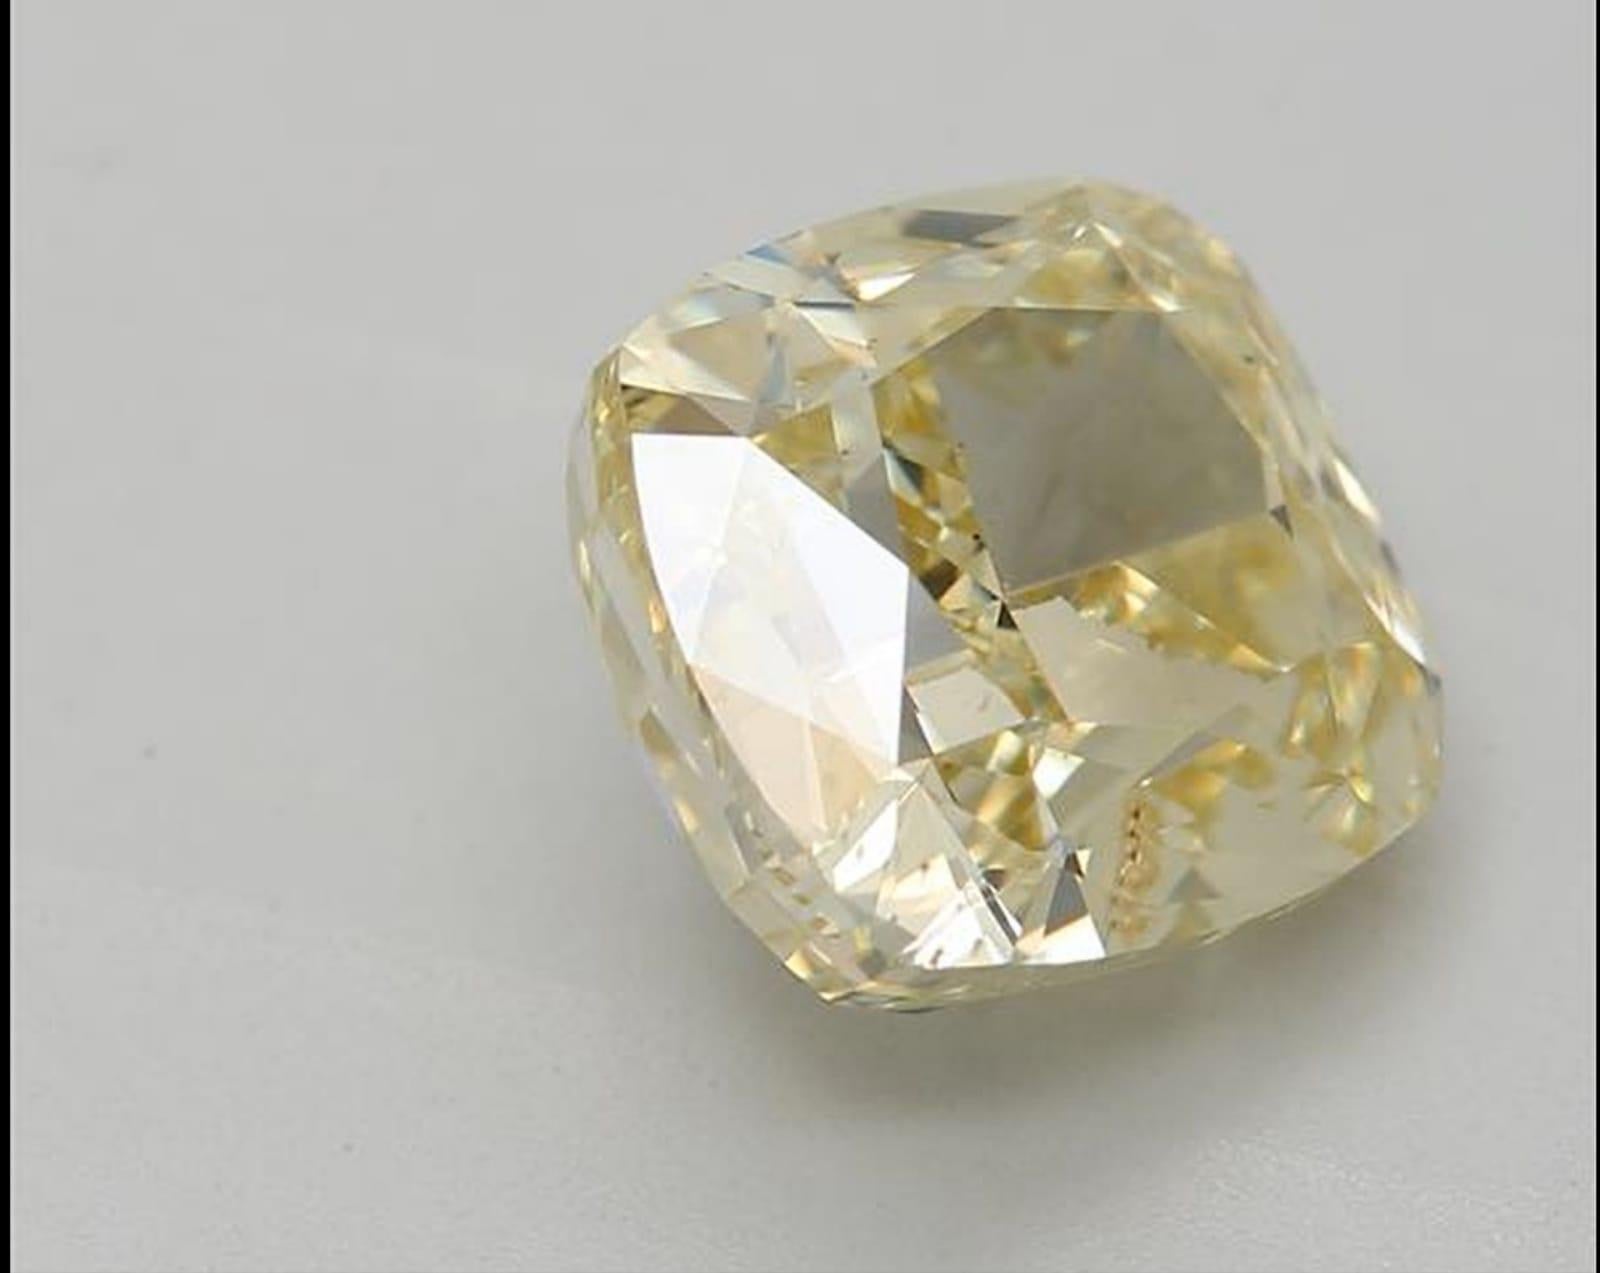 ***100% NATURAL FANCY COLOUR DIAMOND***

✪ Diamond Details ✪

➛ Shape: Cushion
➛ Colour Grade: Fancy Brownish Greenish Yellow
➛ Carat: 2.50
➛ Clarity: VS2
➛ GIA Certified 

^FEATURES OF THE DIAMOND^

Our 2.5 carat diamond is a sizable and valuable